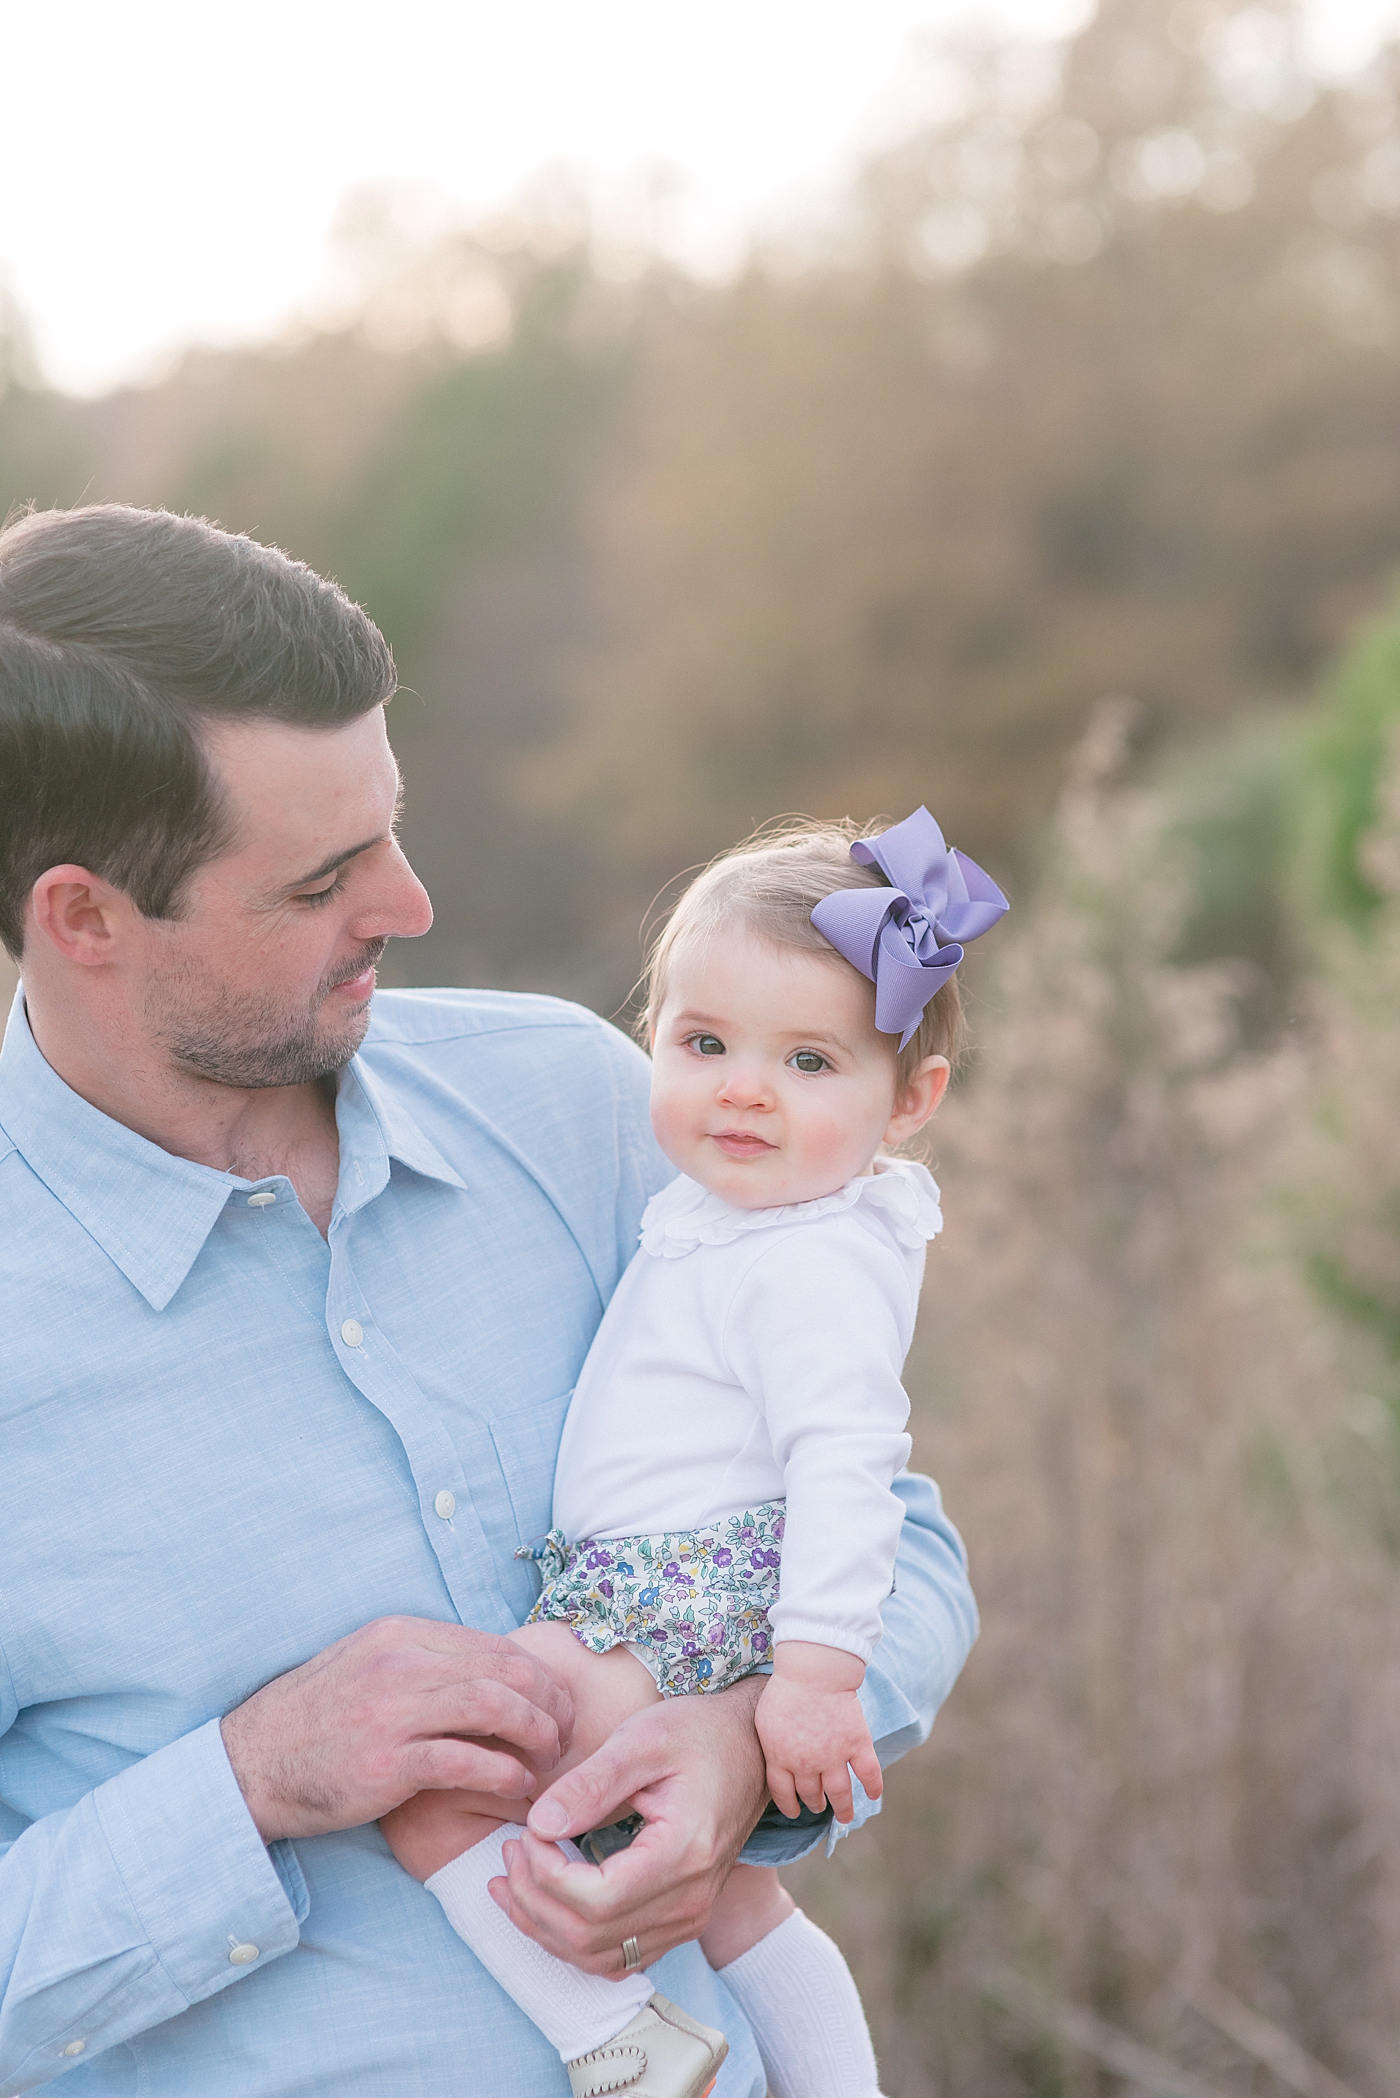 Daddy smiling at baby girl with purple bow during her Milestone Session in Charlotte | Photo by Anna Wisjo Photography 